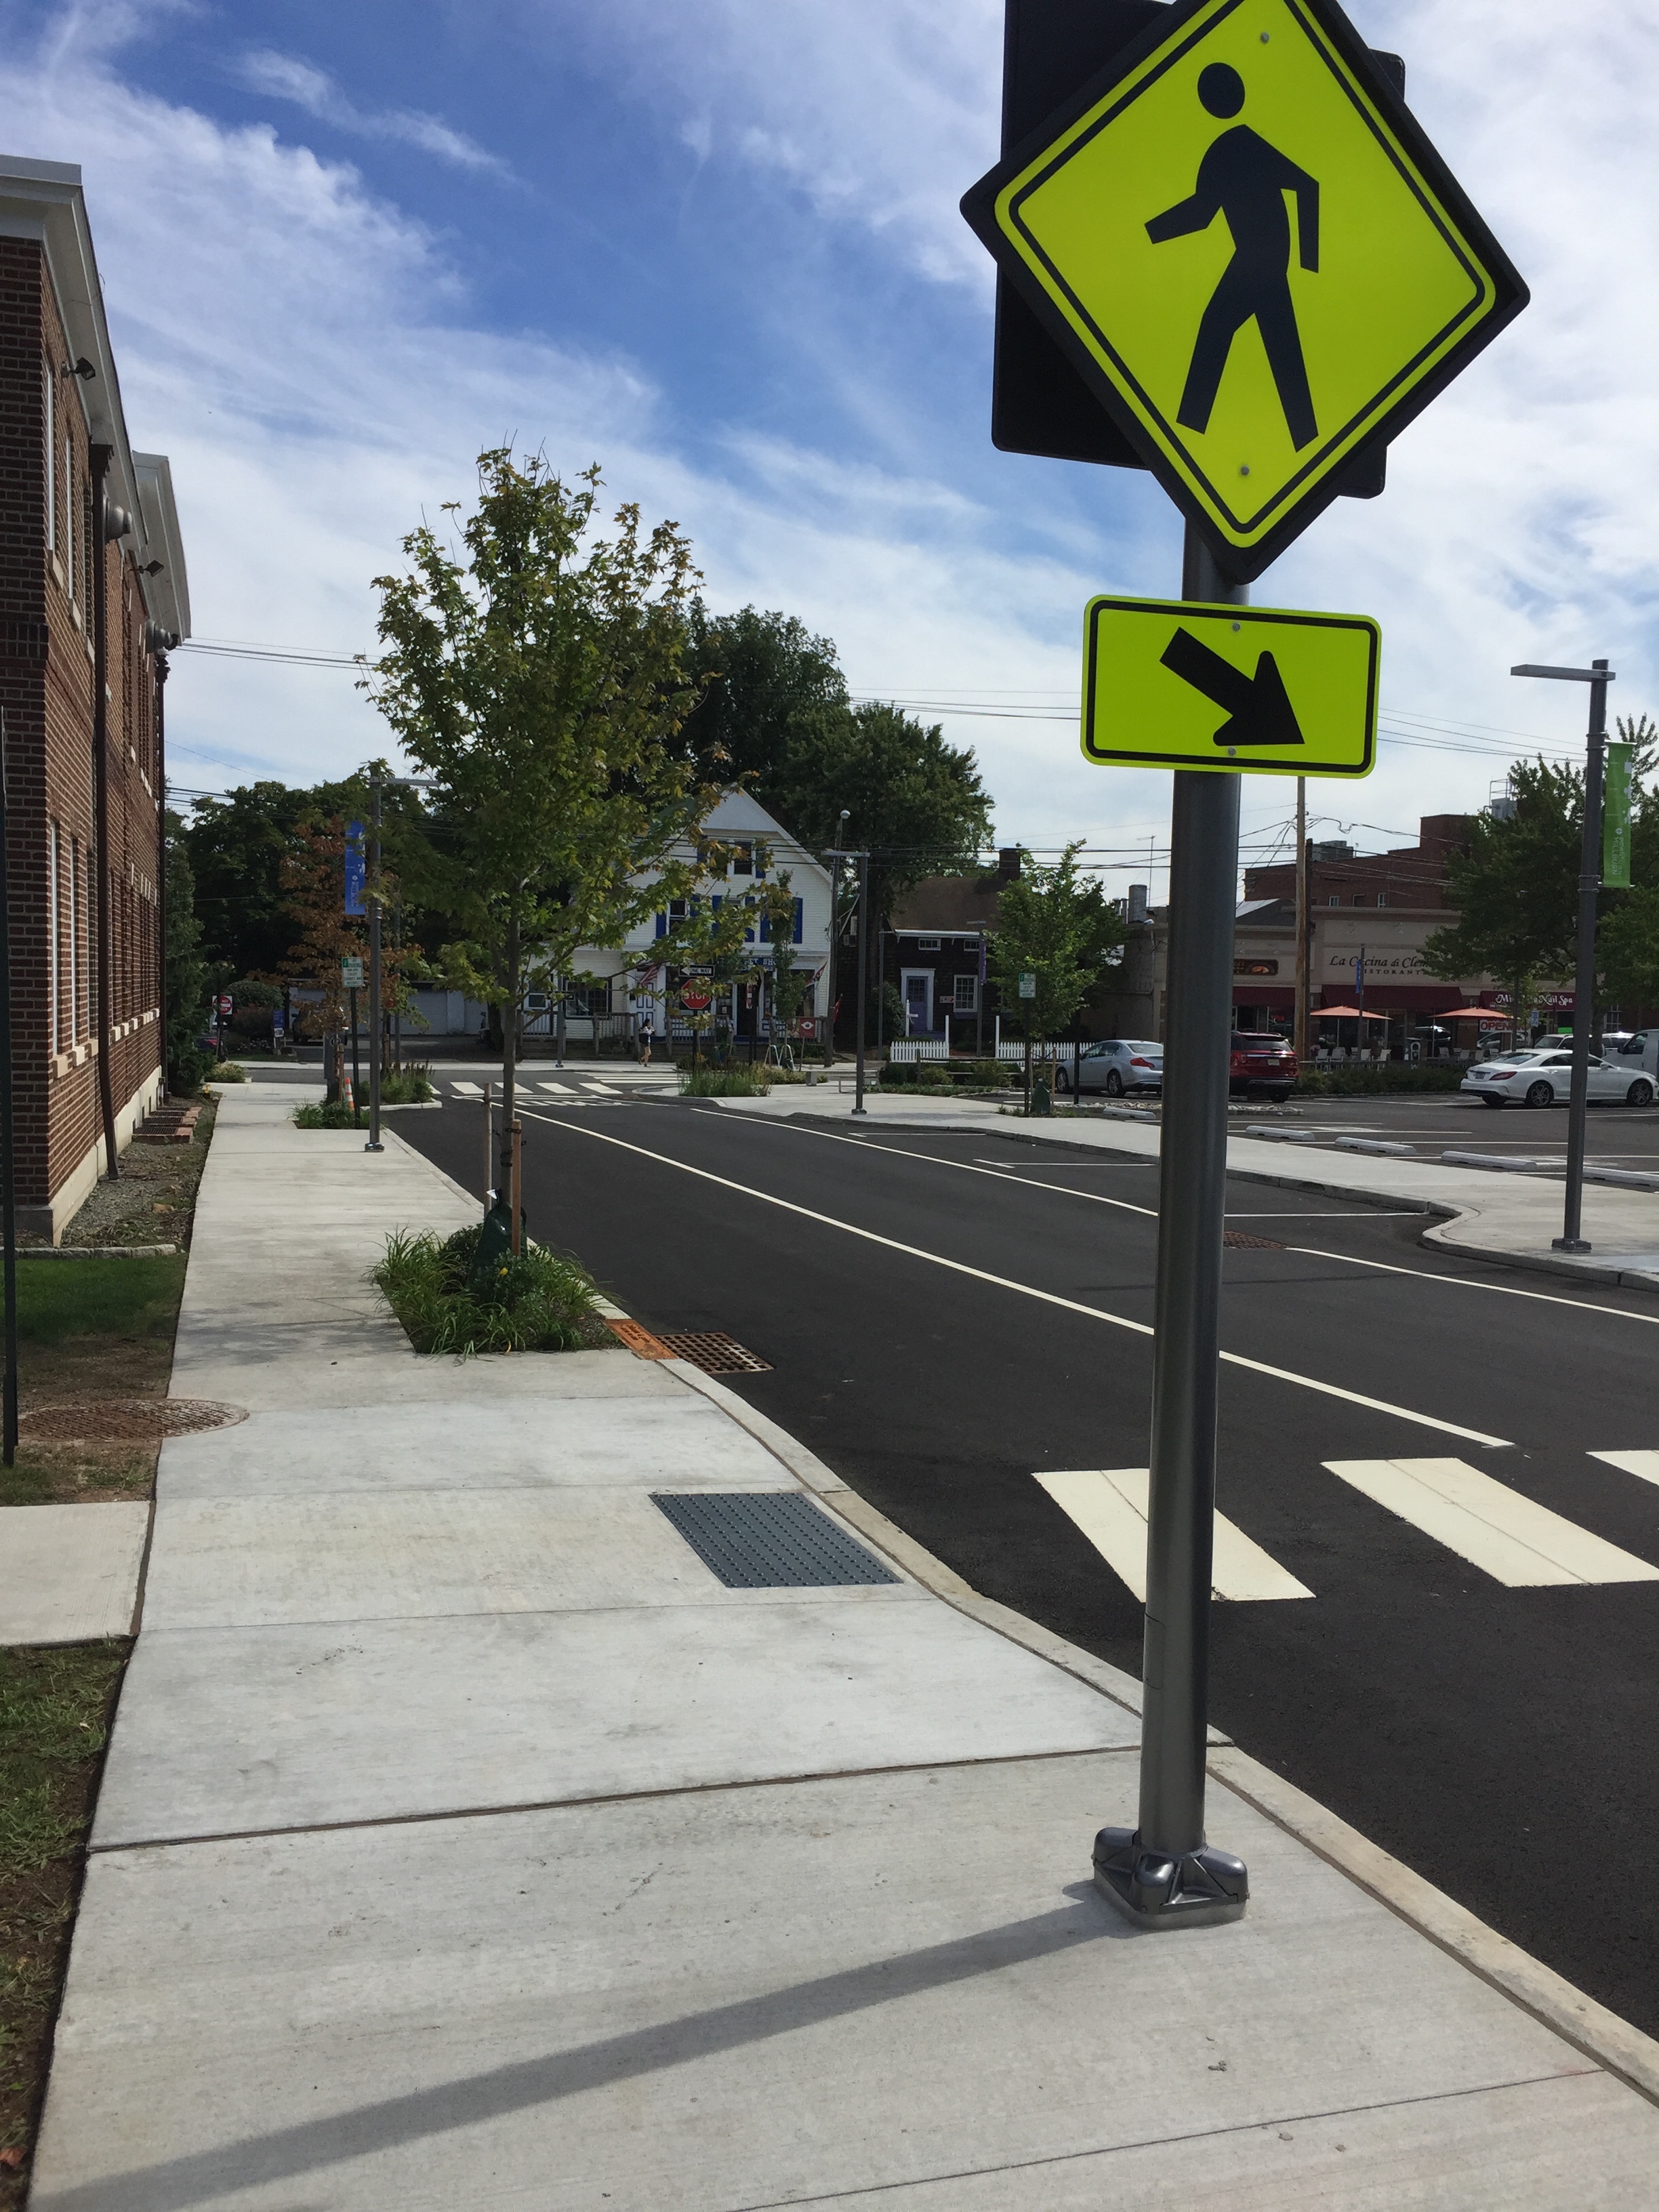 As part of the Complete Streets program, Millburn added ADA compliant ramps and shorter crosswalks for pedestrian safety.